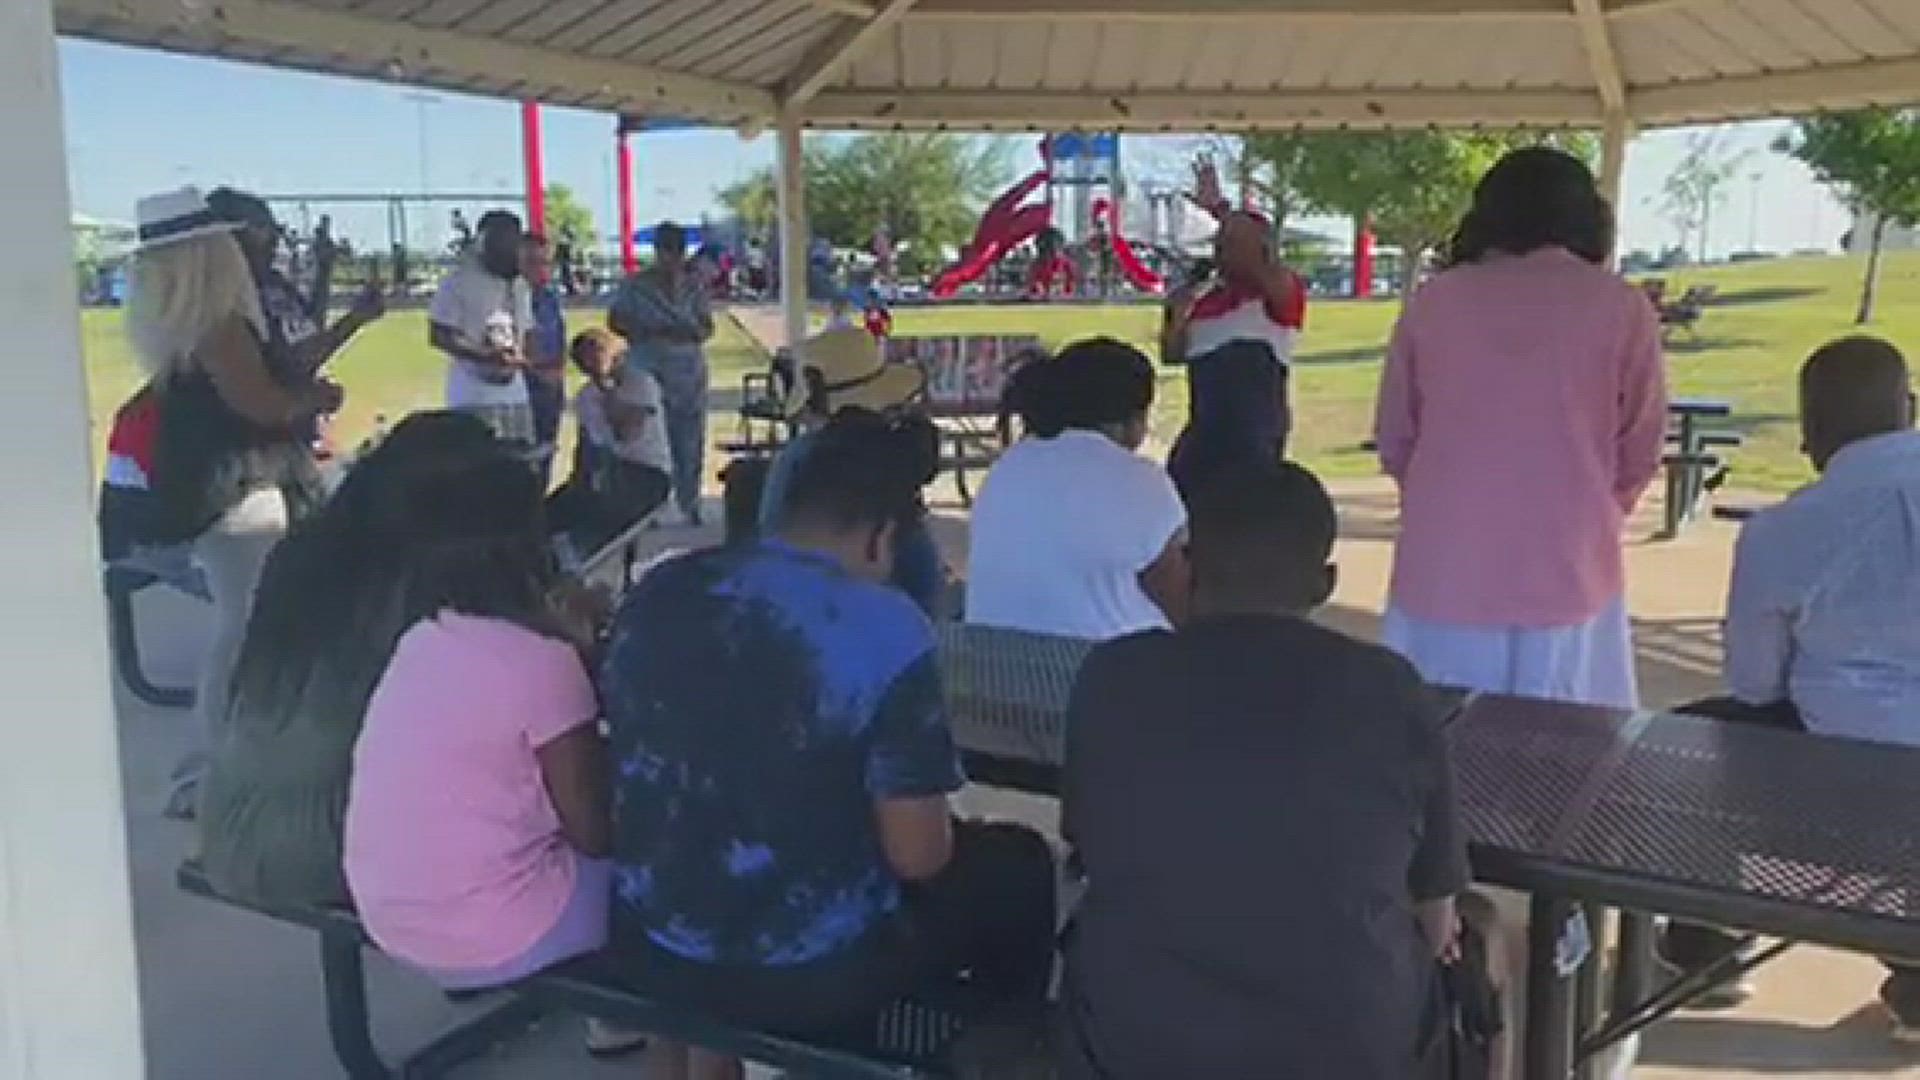 Killeen residents pray for the victims of the Uvalde school massacre
Credit: Ryan Fite